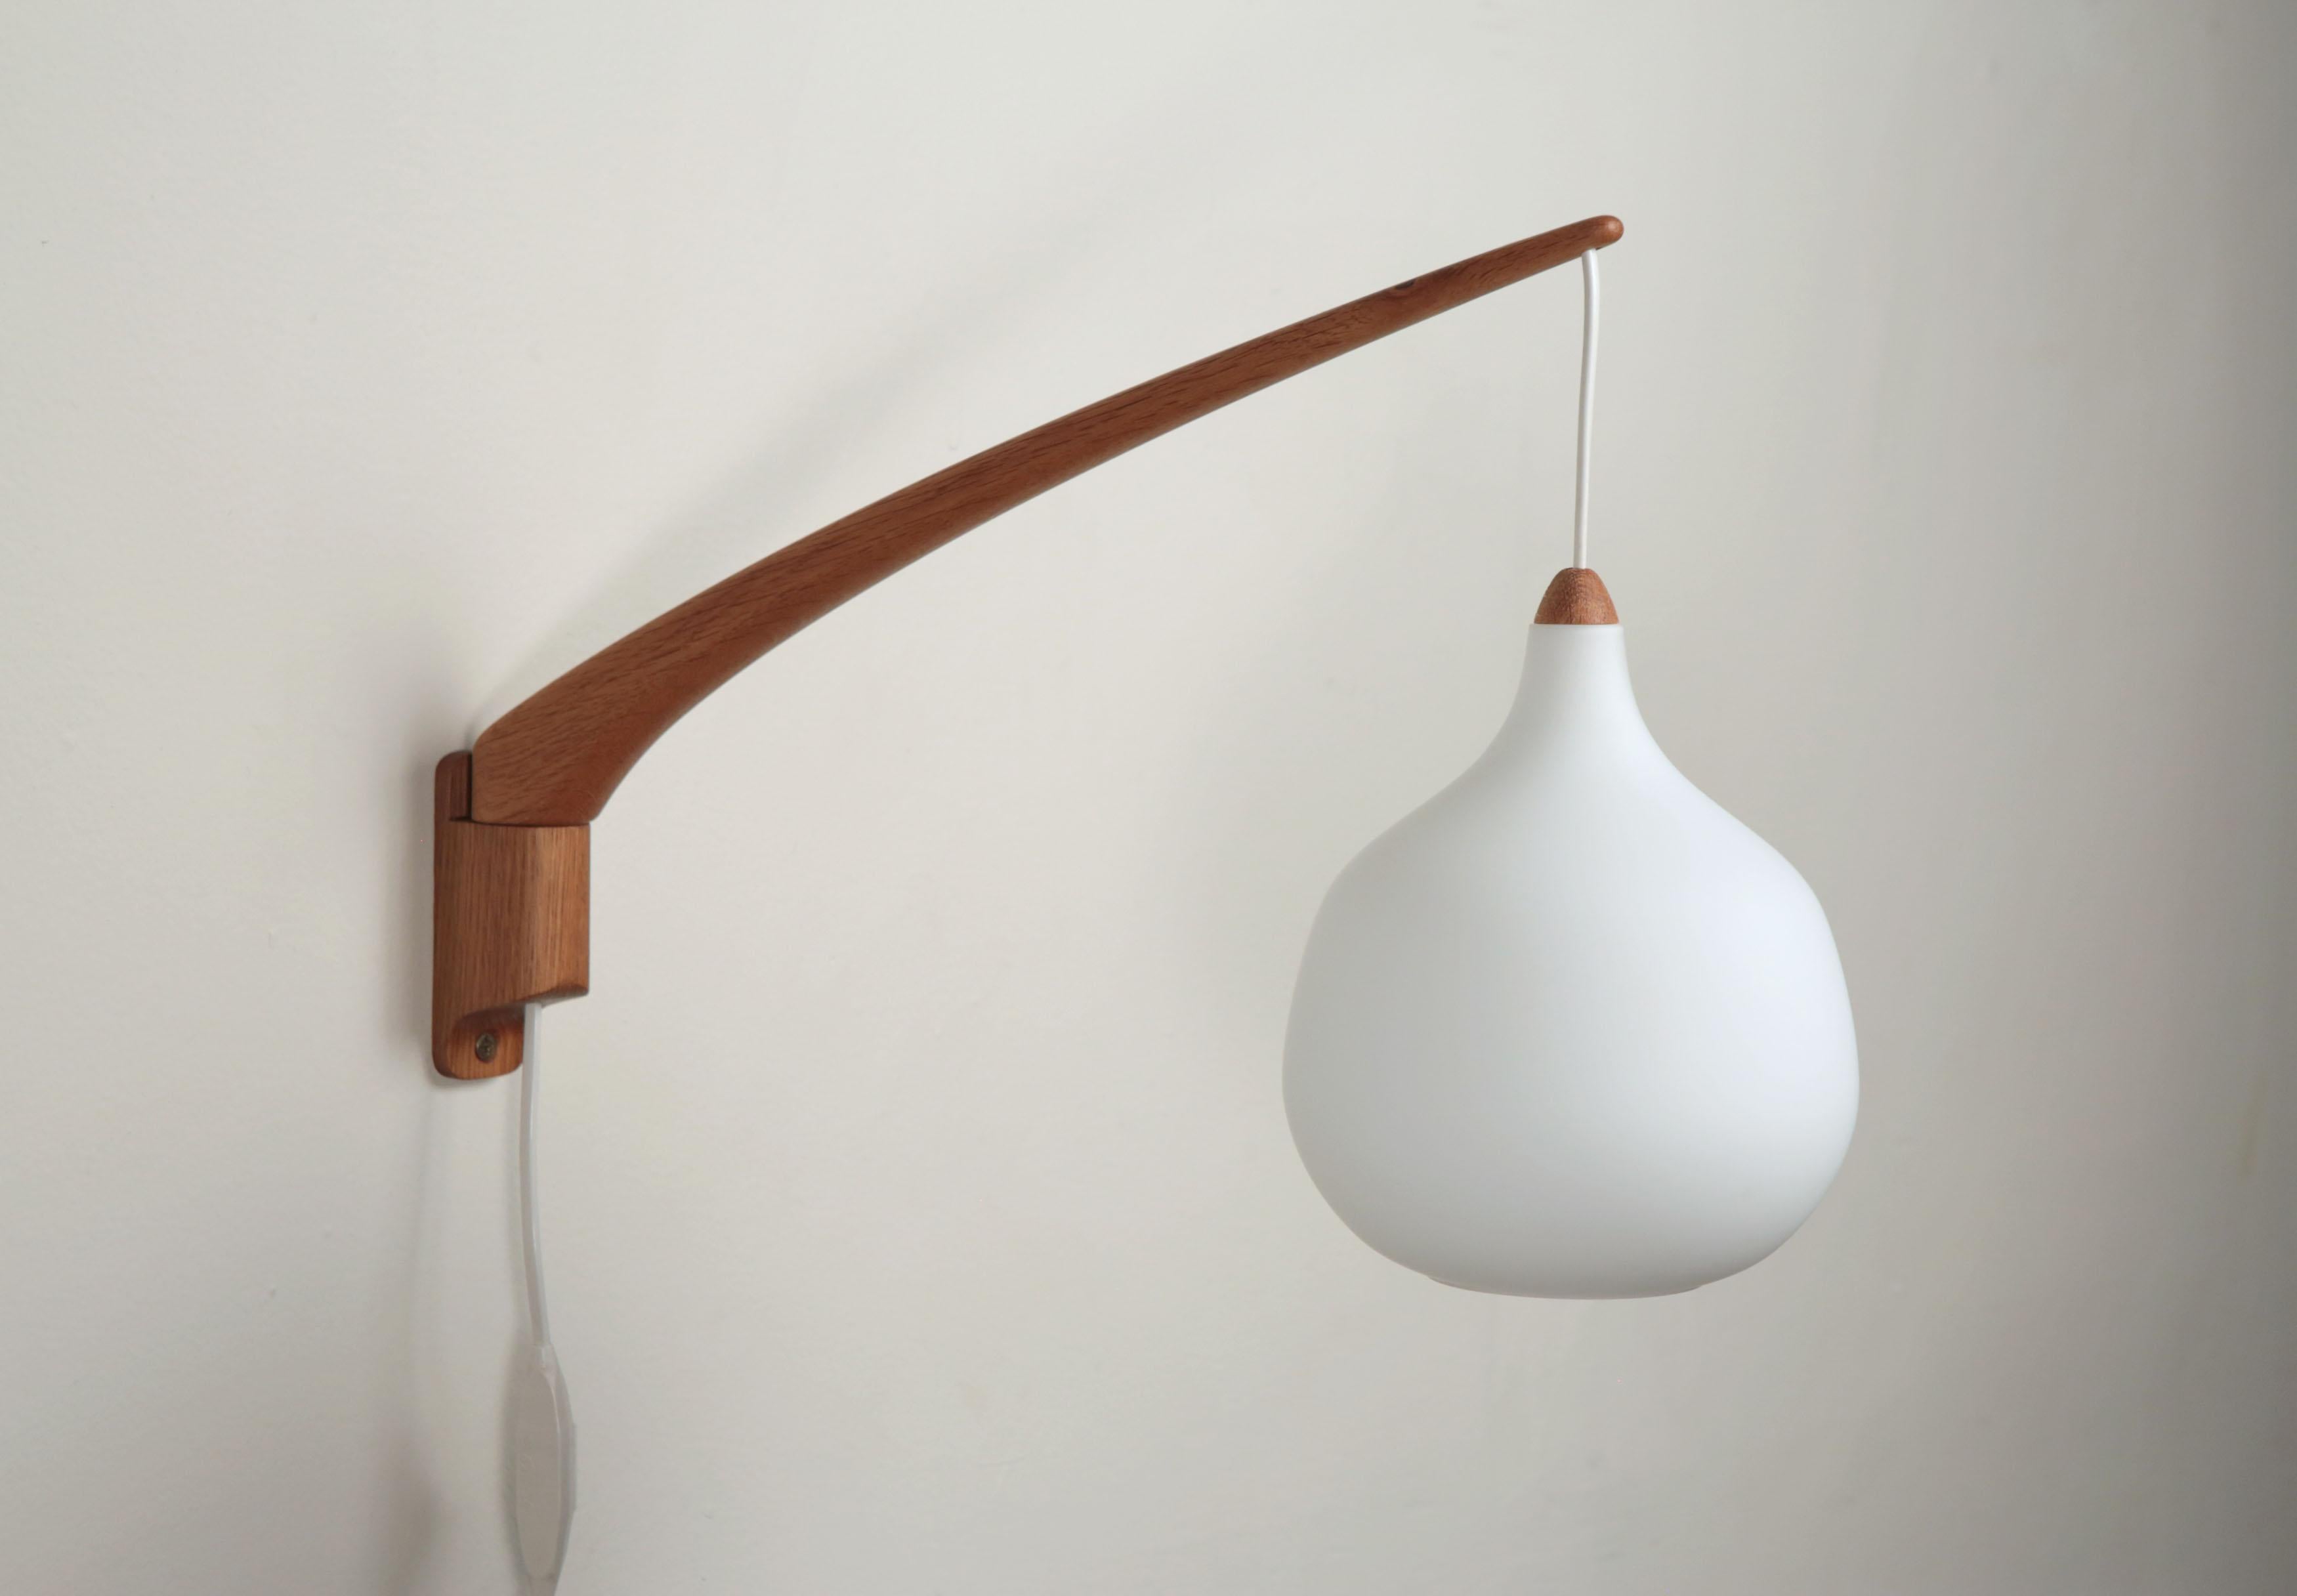 Uno & Östen Kristiansson adjustable oak wall lamp model 705 Luxus, Sweden, 1950s

These Scandinavian Modern wall lamps are designed by the much sought after Uno & Östen Kristiansson and manufactured by Luxus Sweden in the 1950s. 

Made of oak